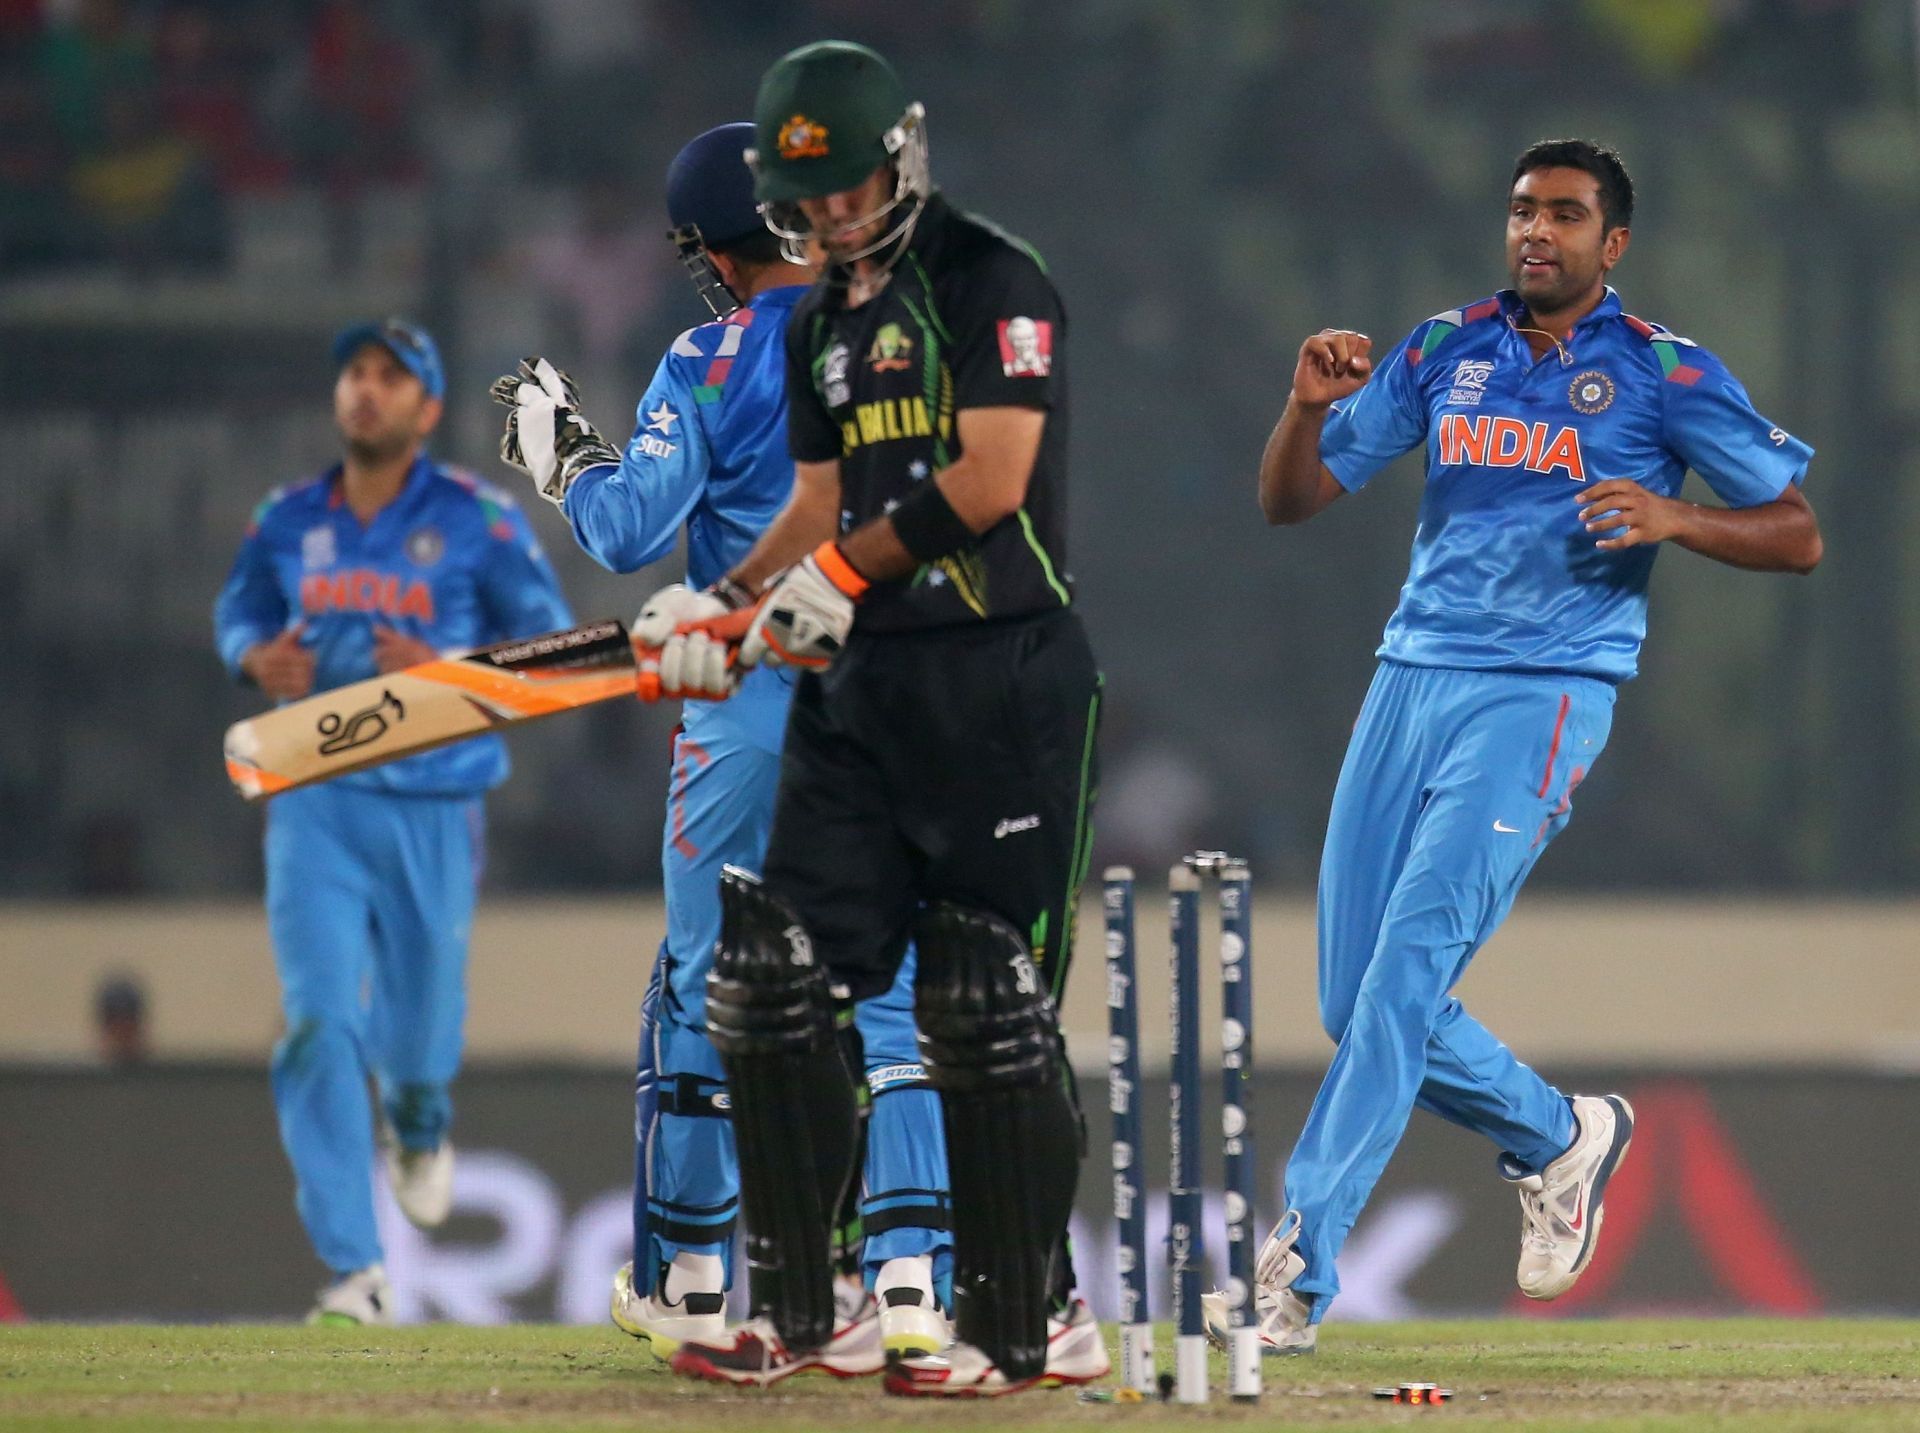 Ravichandran Ashwin reacts after dismissing Glenn Maxwell in the 2014 T20 World Cup group clash. Pic: Getty Images